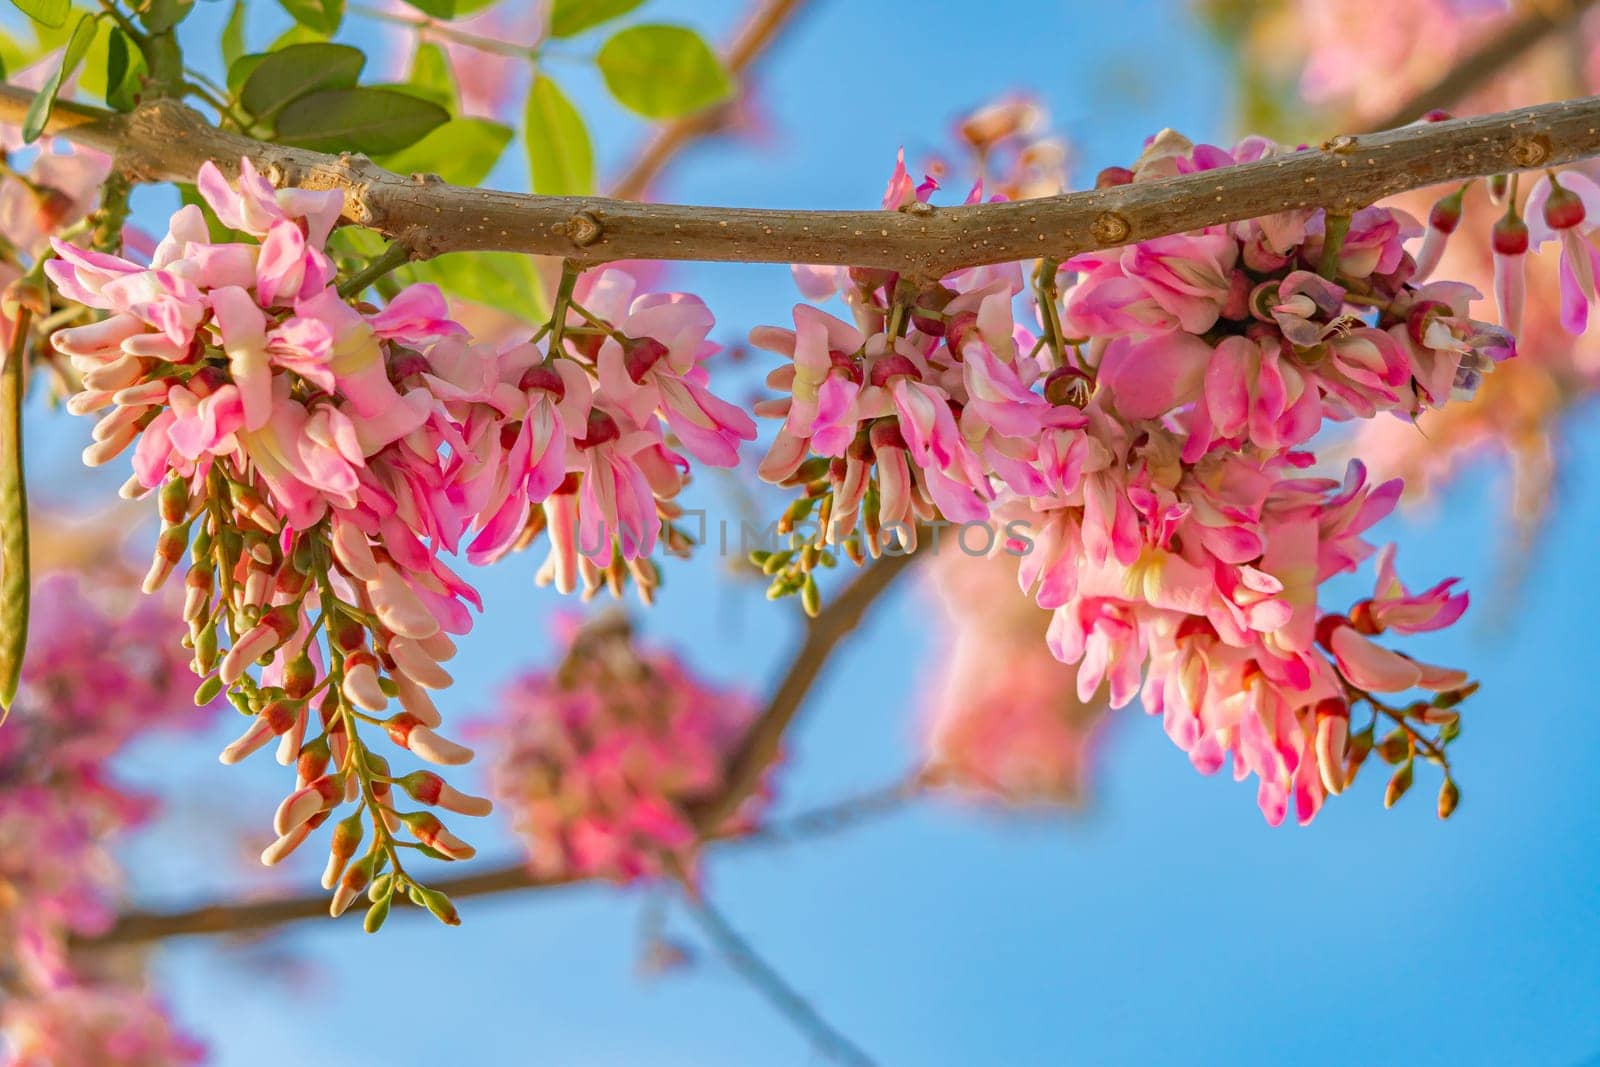 Pink flowers on a tree with the sky in the background.